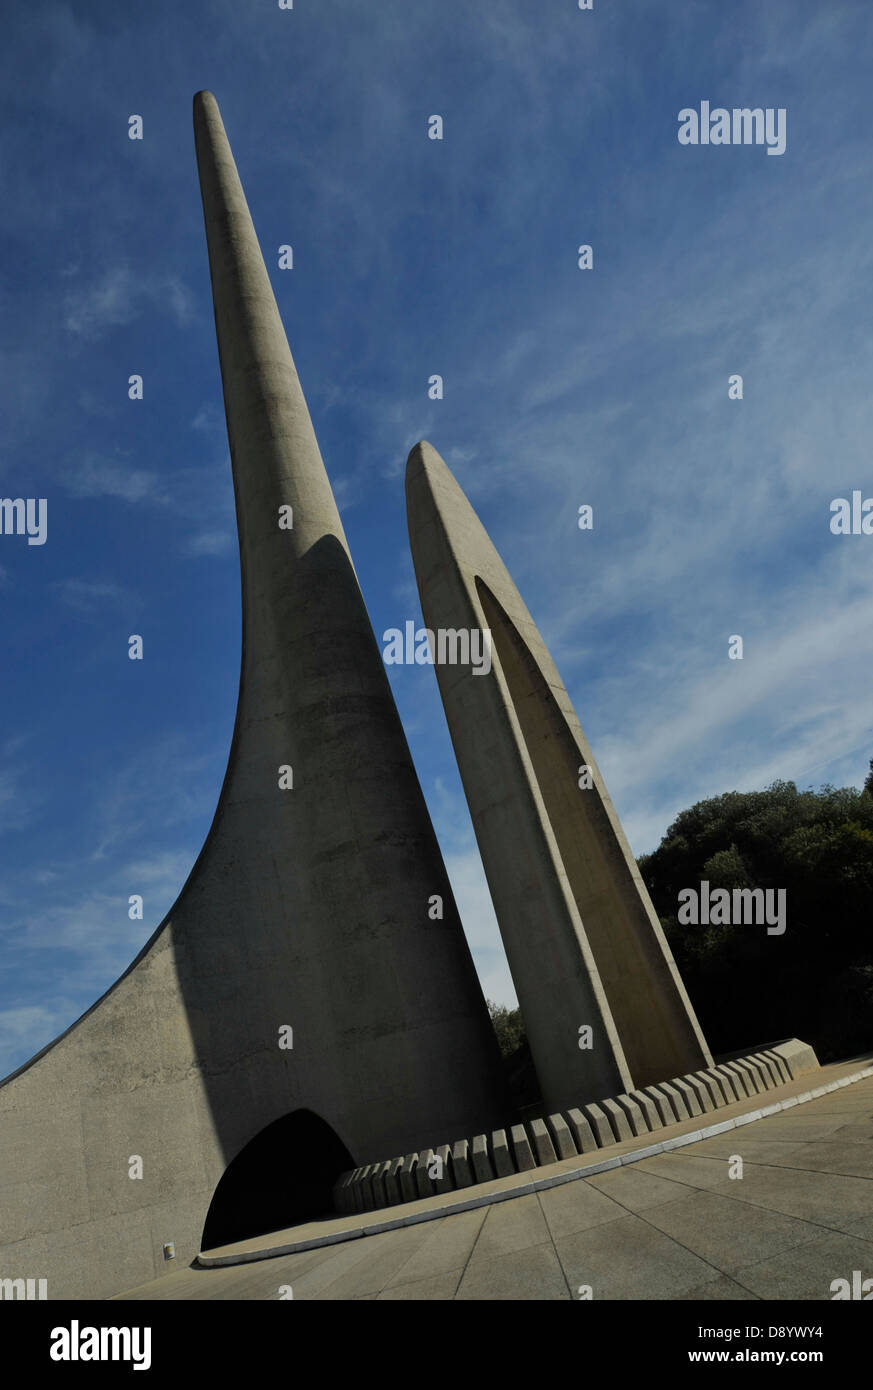 Creative form and shapes of Afrikaans language monument Paarl tourist destination Paarl Western Cape South Africa Historical Stock Photo